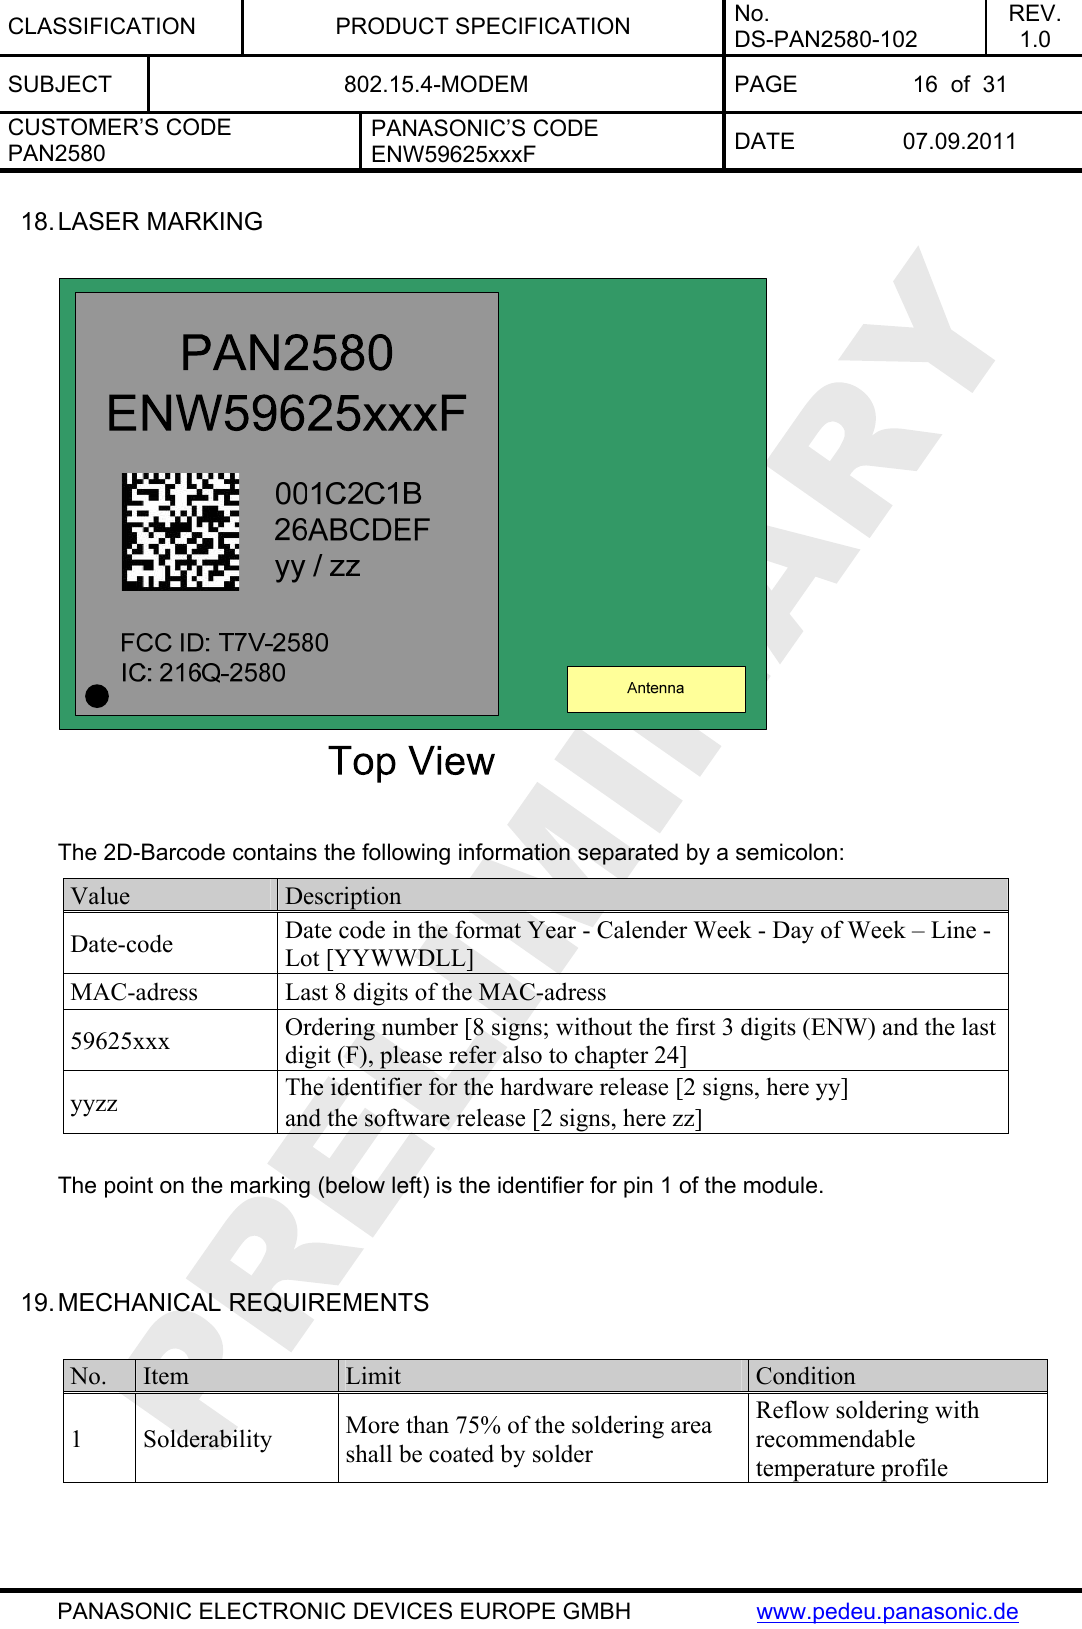 CLASSIFICATION PRODUCT SPECIFICATION No. DS-PAN2580-102 REV. 1.0 SUBJECT  802.15.4-MODEM  PAGE  16  of  31 CUSTOMER’S CODE PAN2580 PANASONIC’S CODE ENW59625xxxF  DATE 07.09.2011   PANASONIC ELECTRONIC DEVICES EUROPE GMBH  www.pedeu.panasonic.de 18. LASER MARKING    The 2D-Barcode contains the following information separated by a semicolon: Value  Description Date-code  Date code in the format Year - Calender Week - Day of Week – Line - Lot [YYWWDLL] MAC-adress  Last 8 digits of the MAC-adress 59625xxx  Ordering number [8 signs; without the first 3 digits (ENW) and the last digit (F), please refer also to chapter 24] yyzz  The identifier for the hardware release [2 signs, here yy]  and the software release [2 signs, here zz]  The point on the marking (below left) is the identifier for pin 1 of the module.   19. MECHANICAL REQUIREMENTS  No.  Item  Limit  Condition 1 Solderability  More than 75% of the soldering area shall be coated by solder Reflow soldering with recommendable temperature profile  